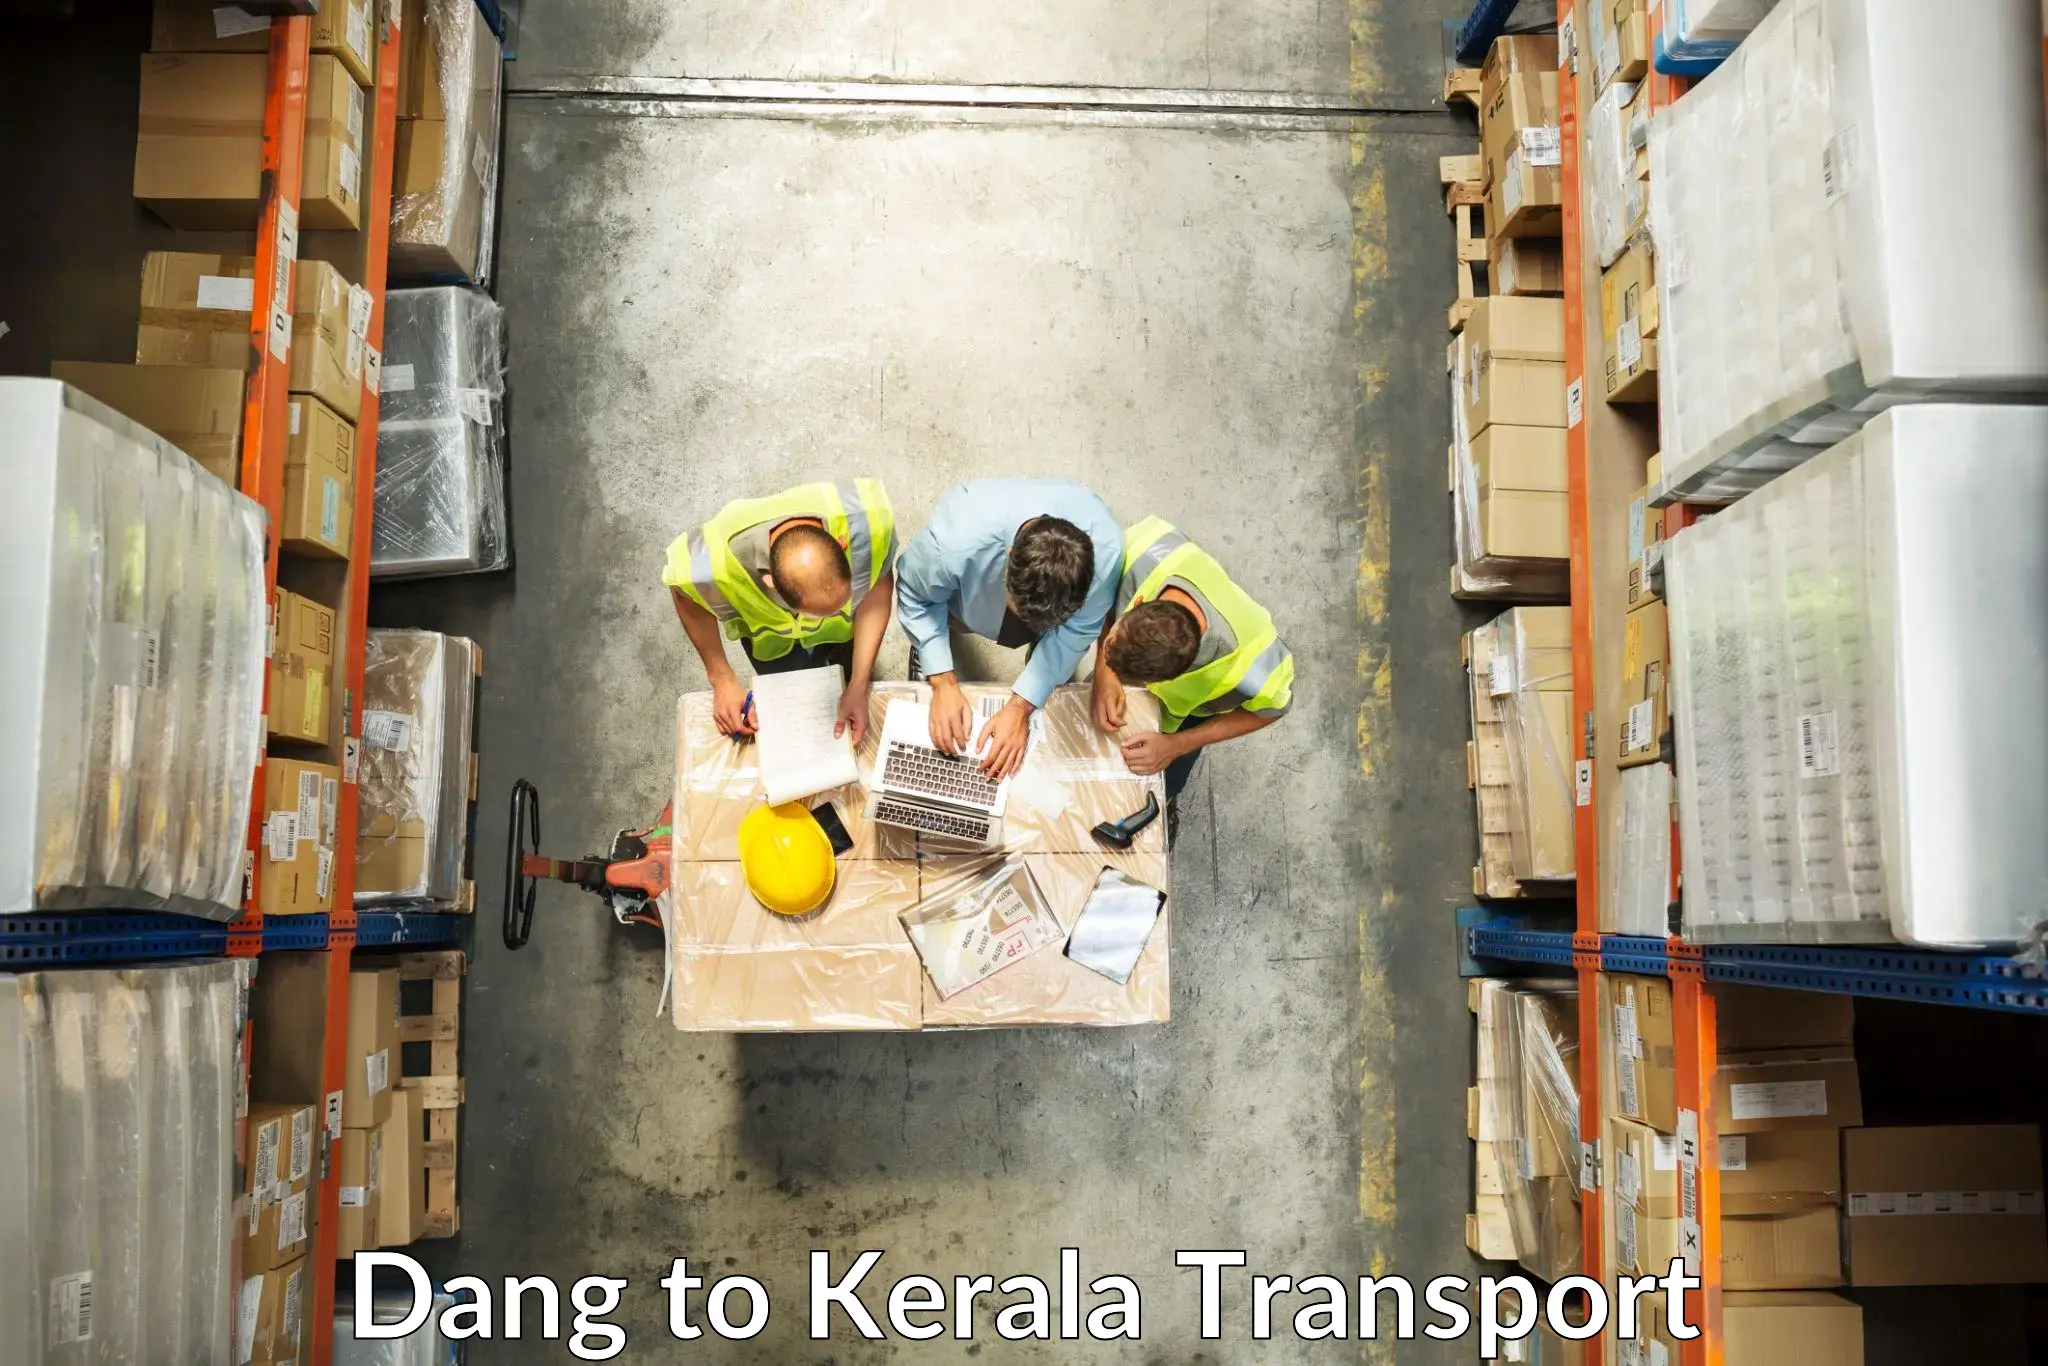 Container transport service Dang to Kochi